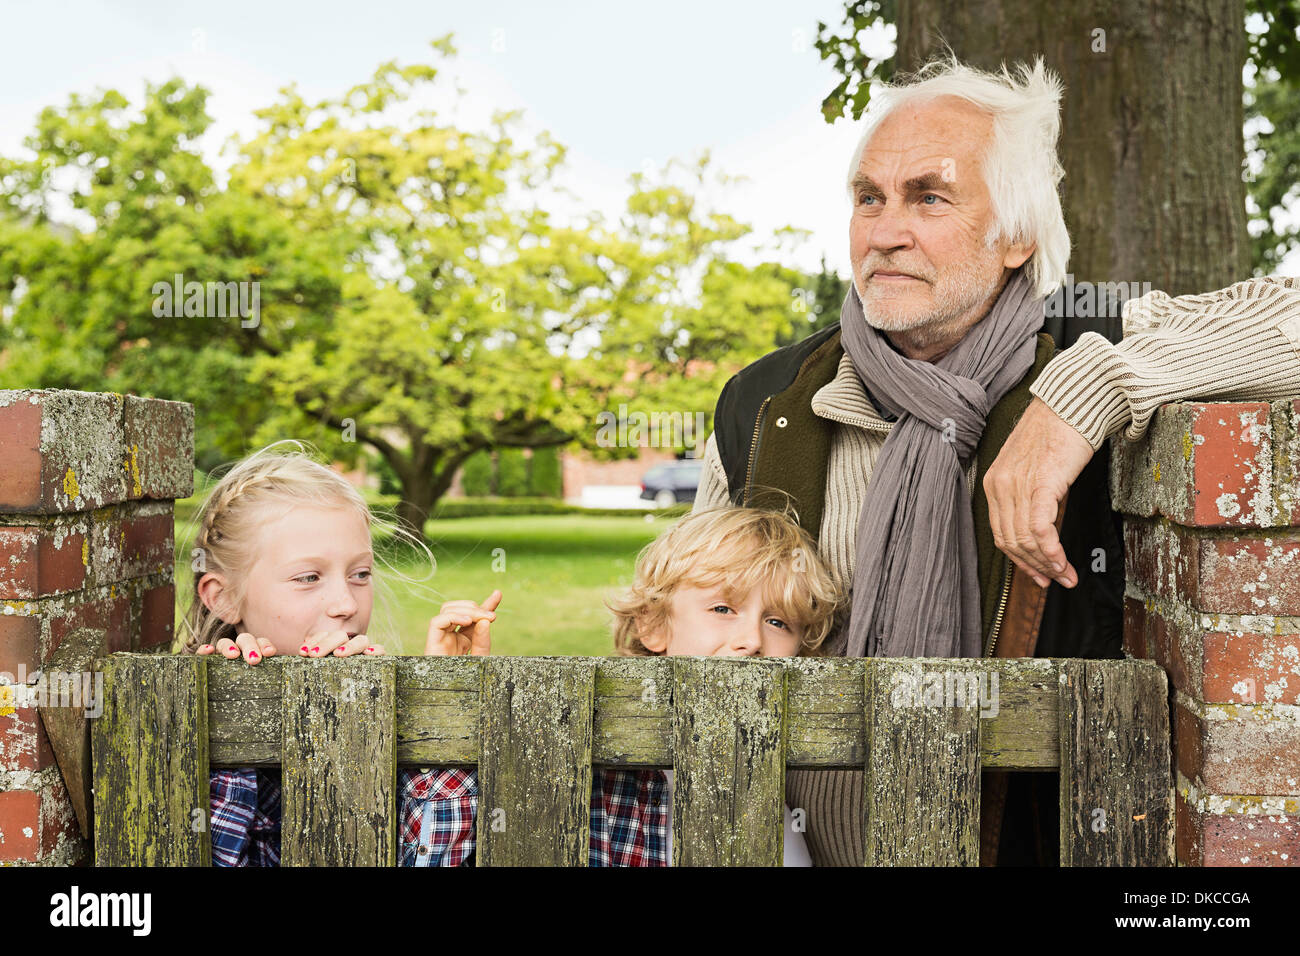 Grandfather and grandchildren by wooden gate Stock Photo